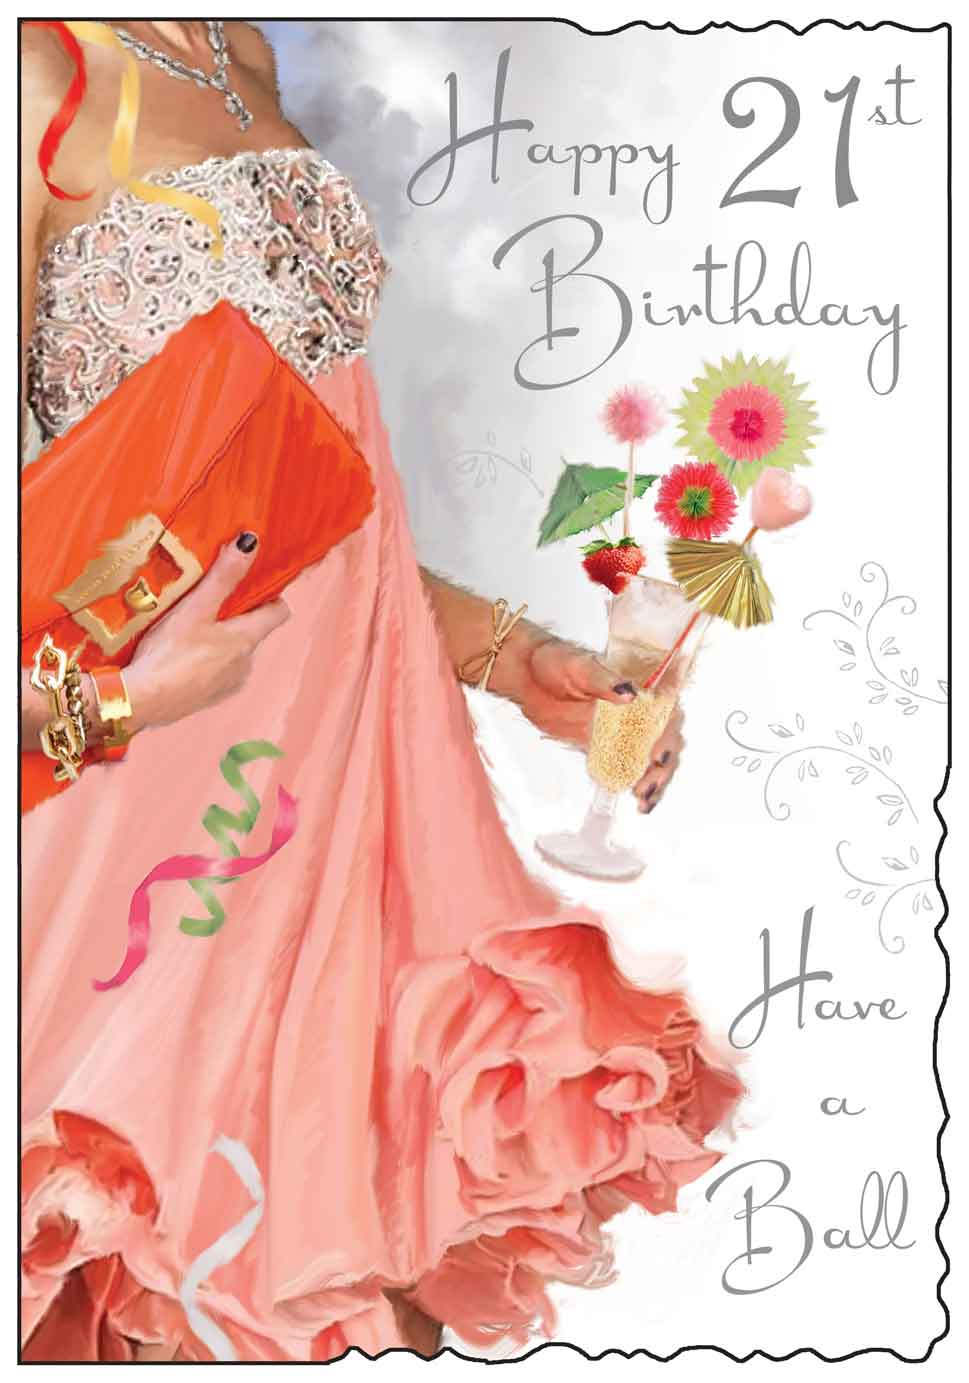 21st Birthday Card - Pretty Frilly Dress And Posh Cocktail